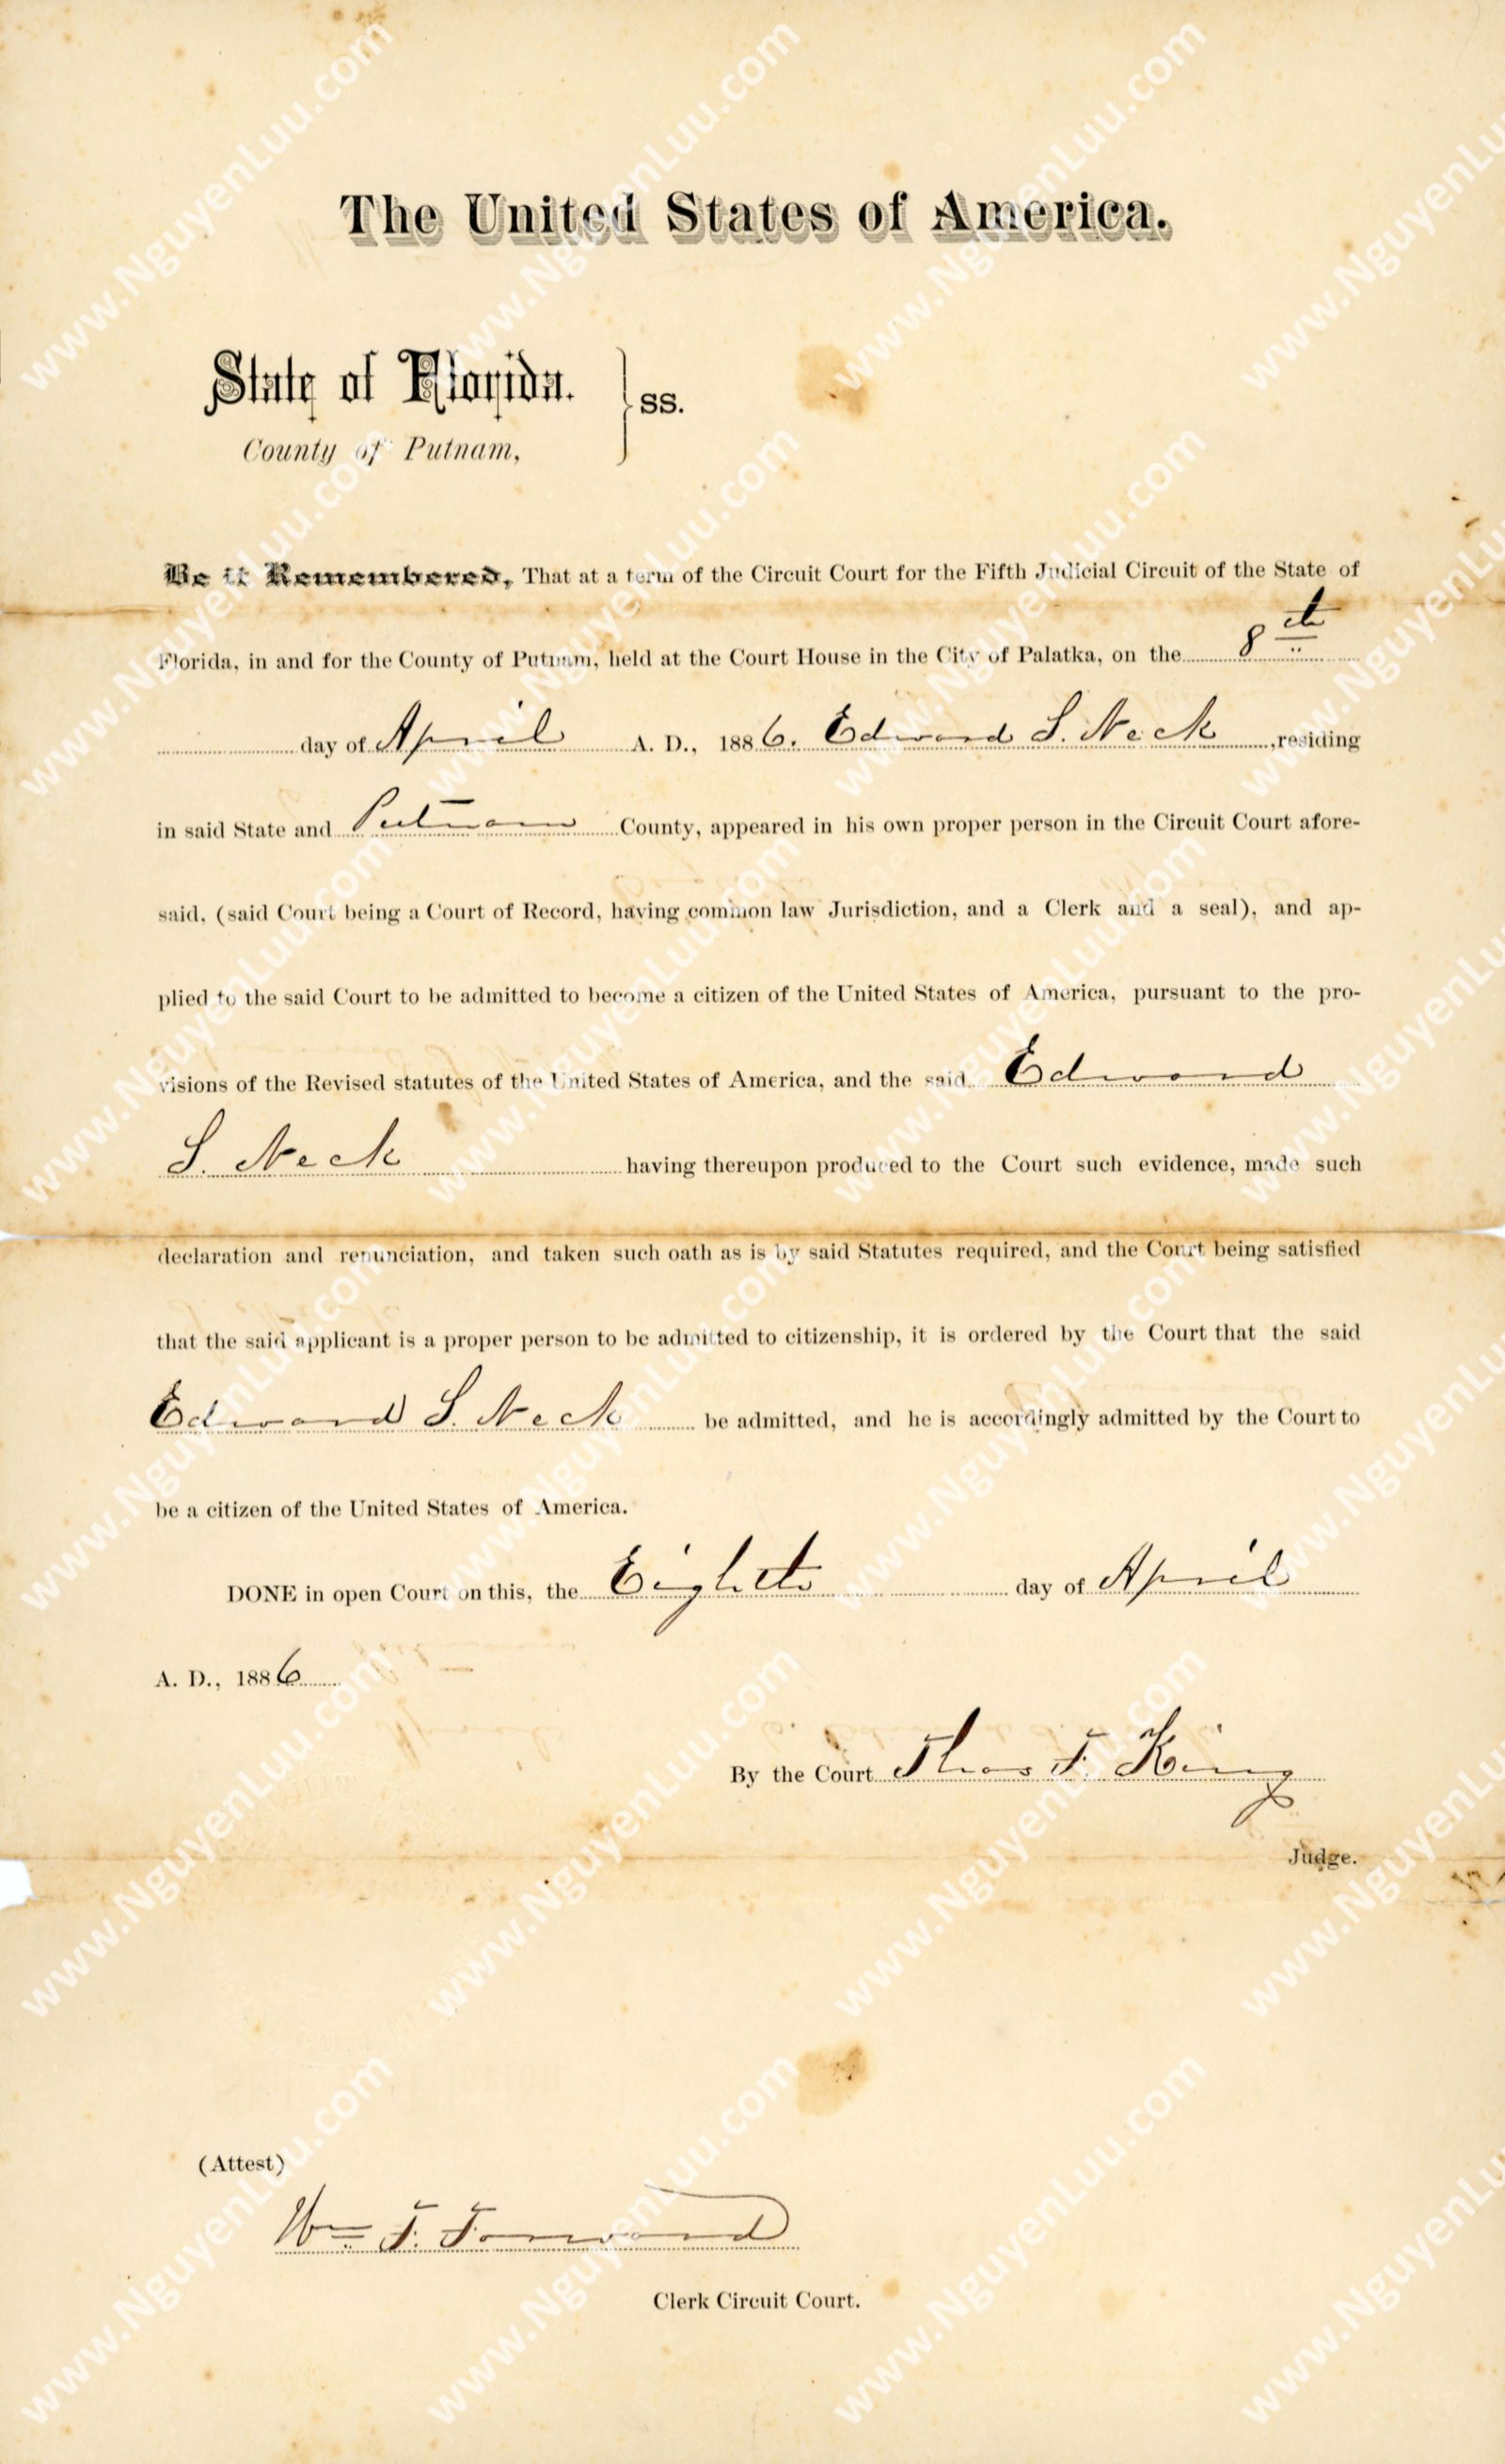 U.S. Certificate of Citizenship issued in the State of Florida in 1886